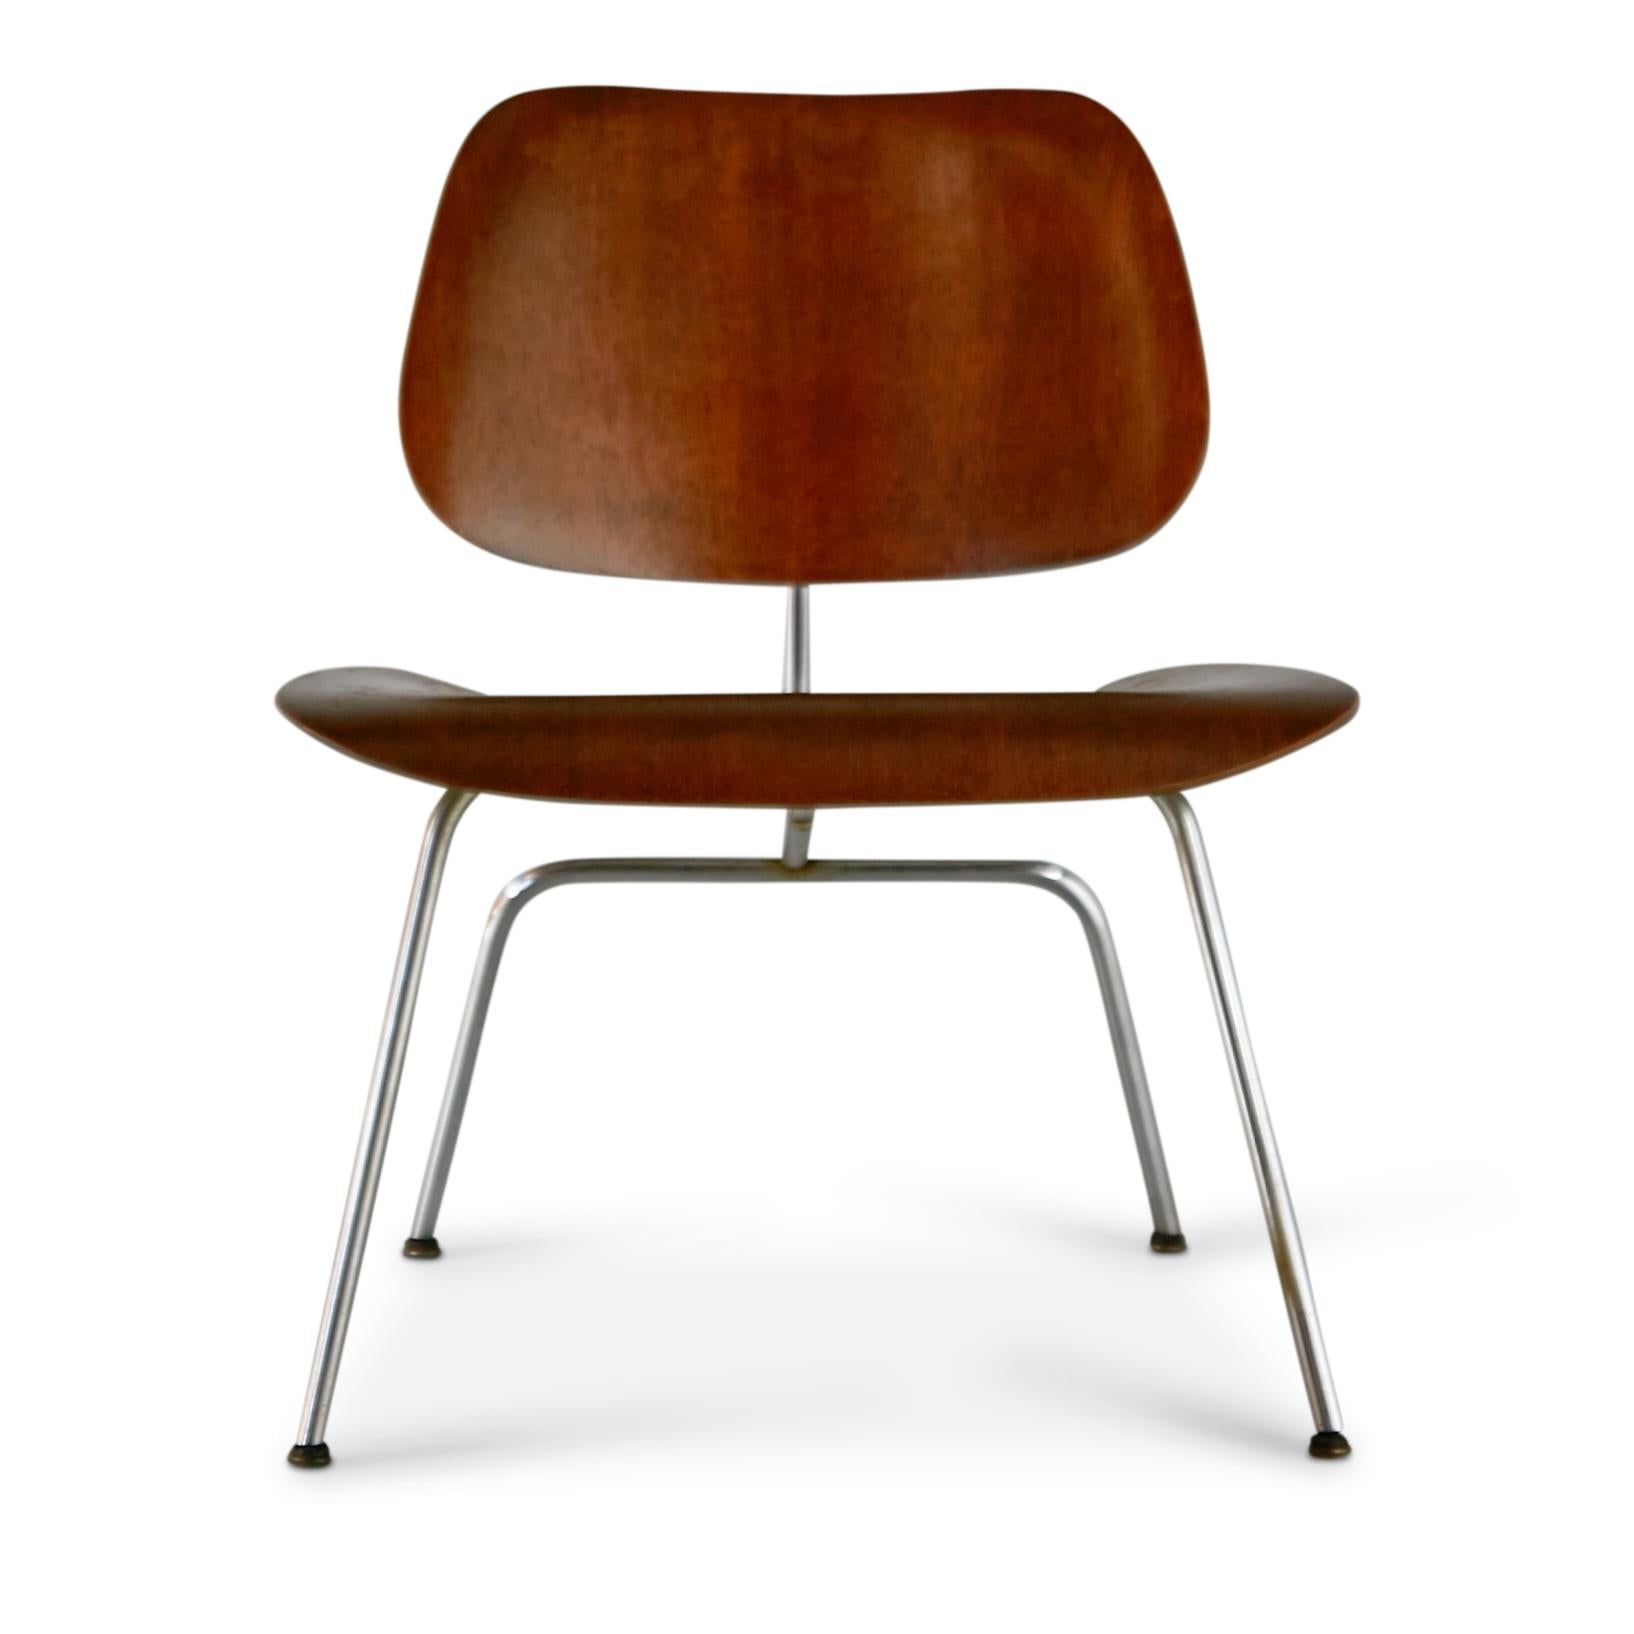 Yes, these are the first year originals of the design from 1946, a highly sought after and extremely collectible pair of Walnut LCM chairs by Ray and Charles Eames, manufactured by Evans Products Company, prior to Herman Miller which took over in